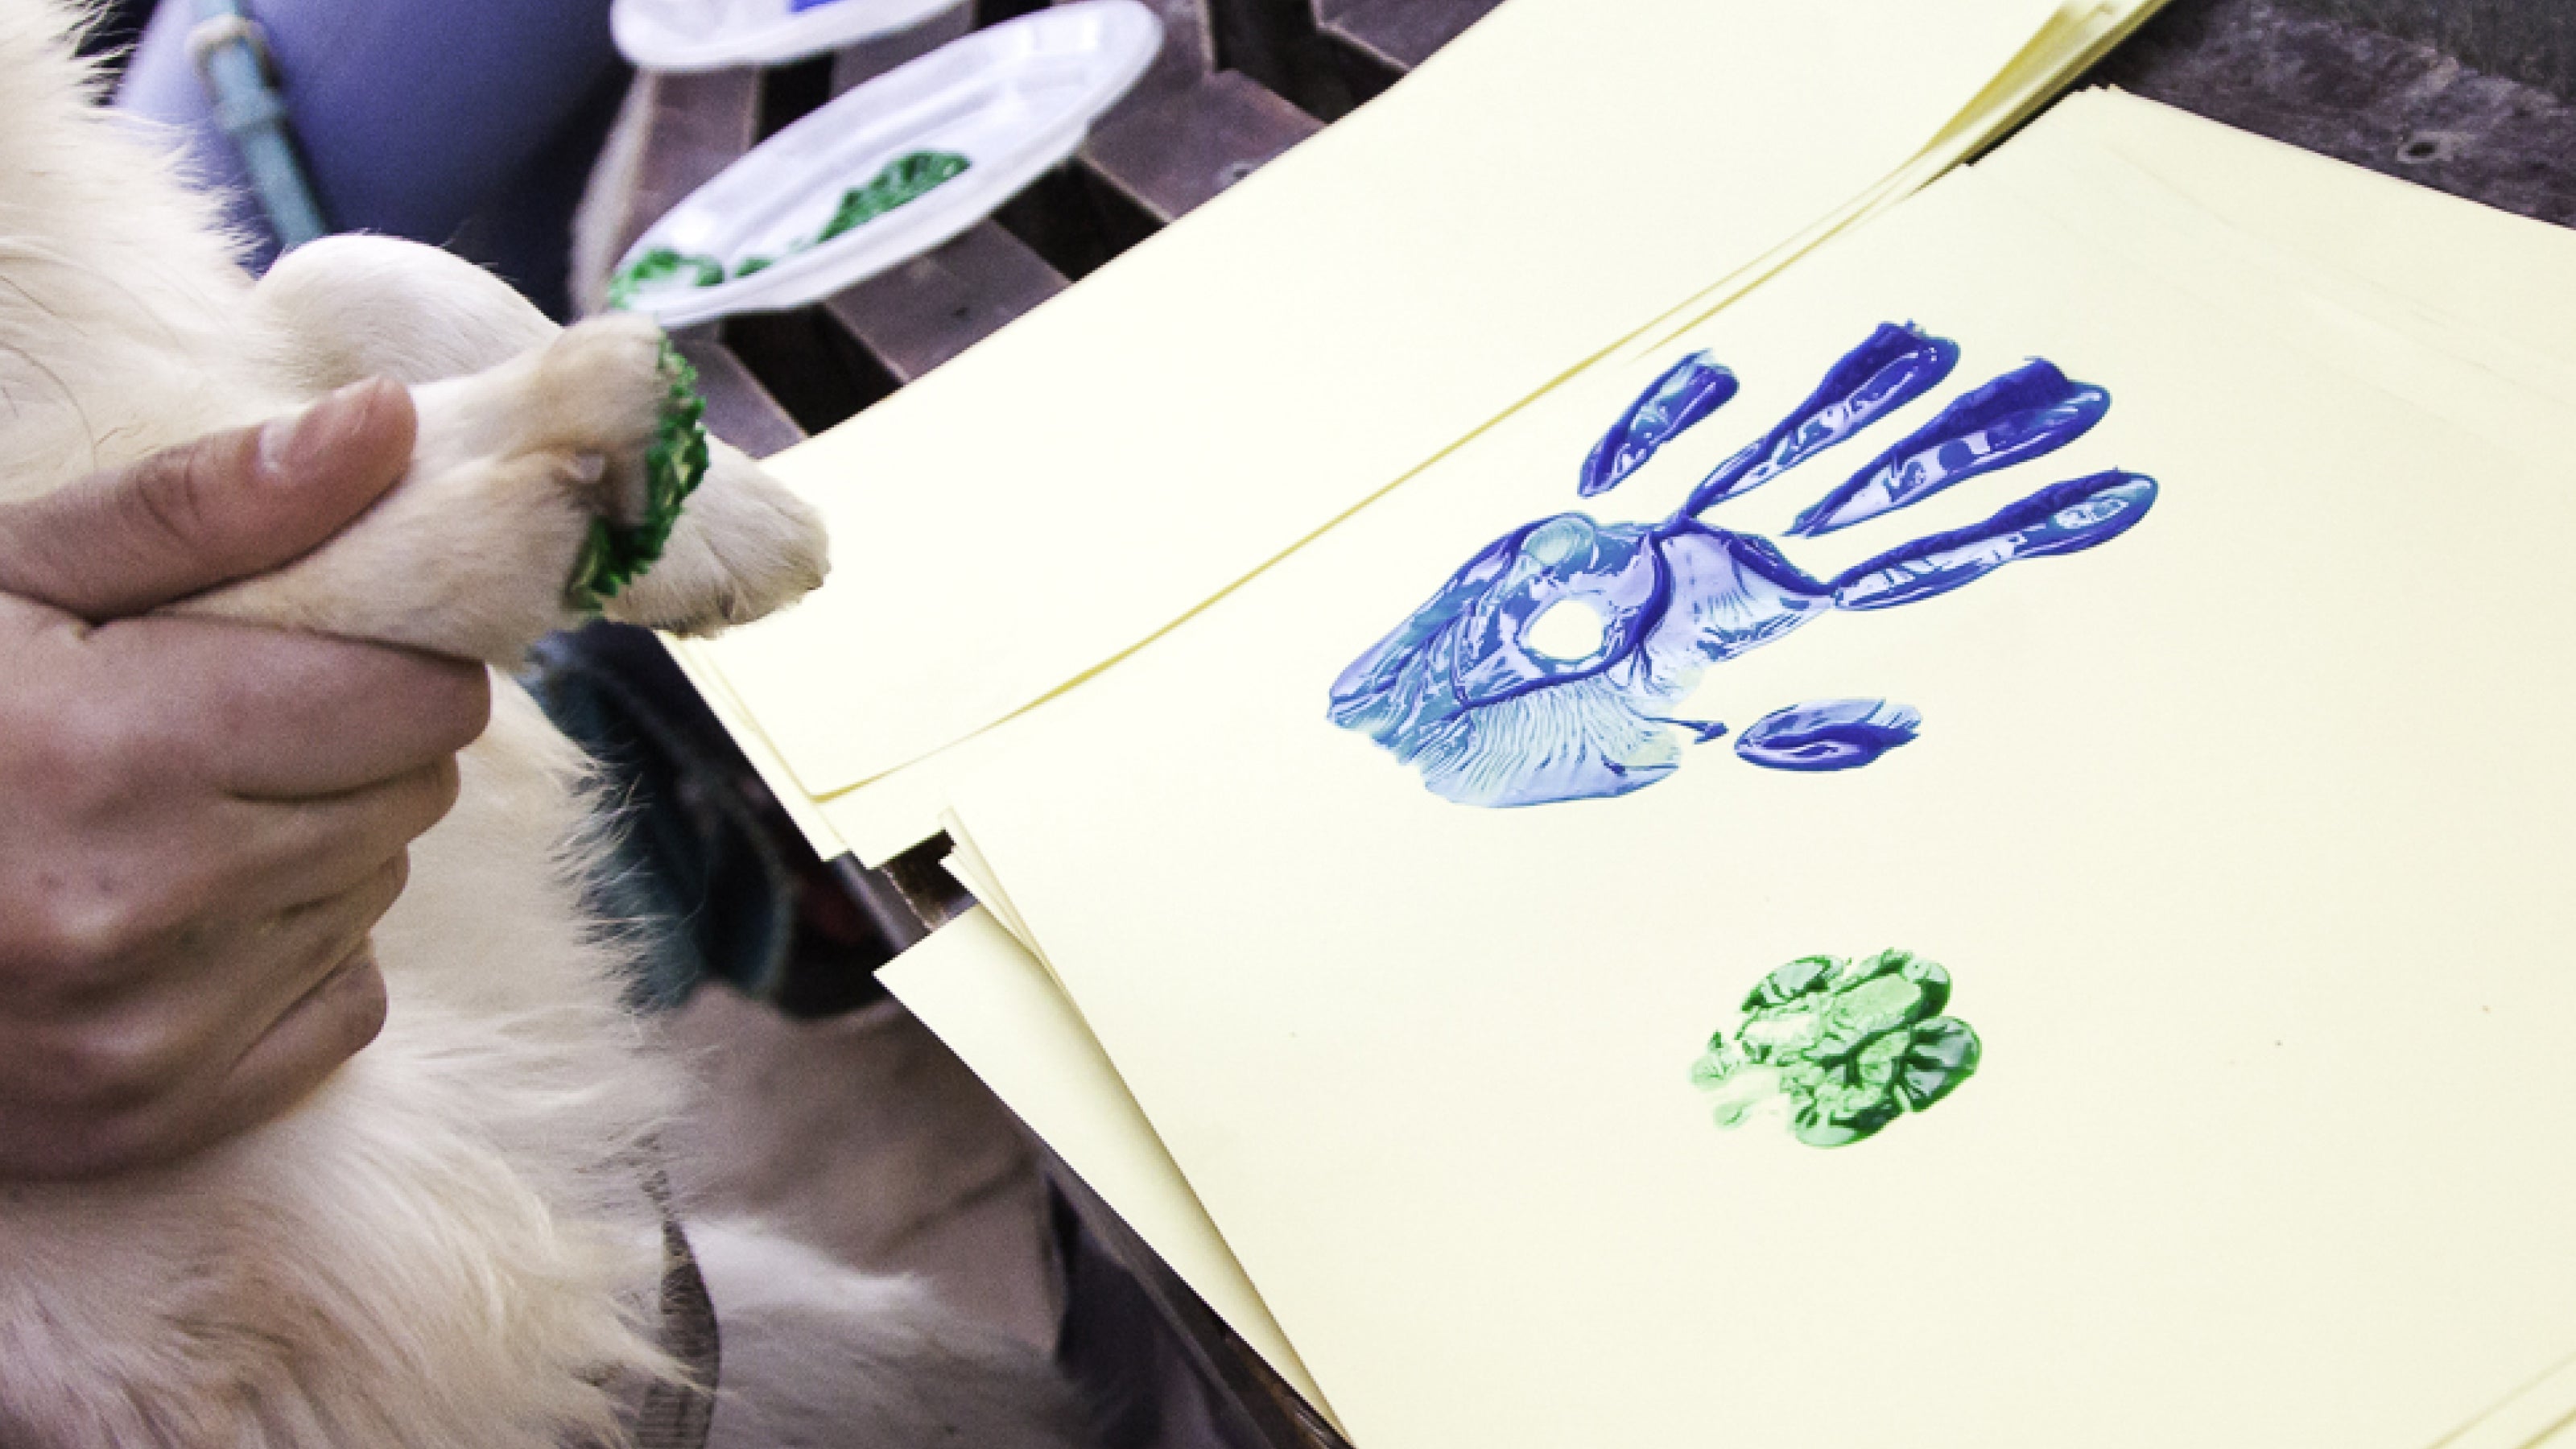 A brown and white dog has its paw print added to a hand print on a piece of paper